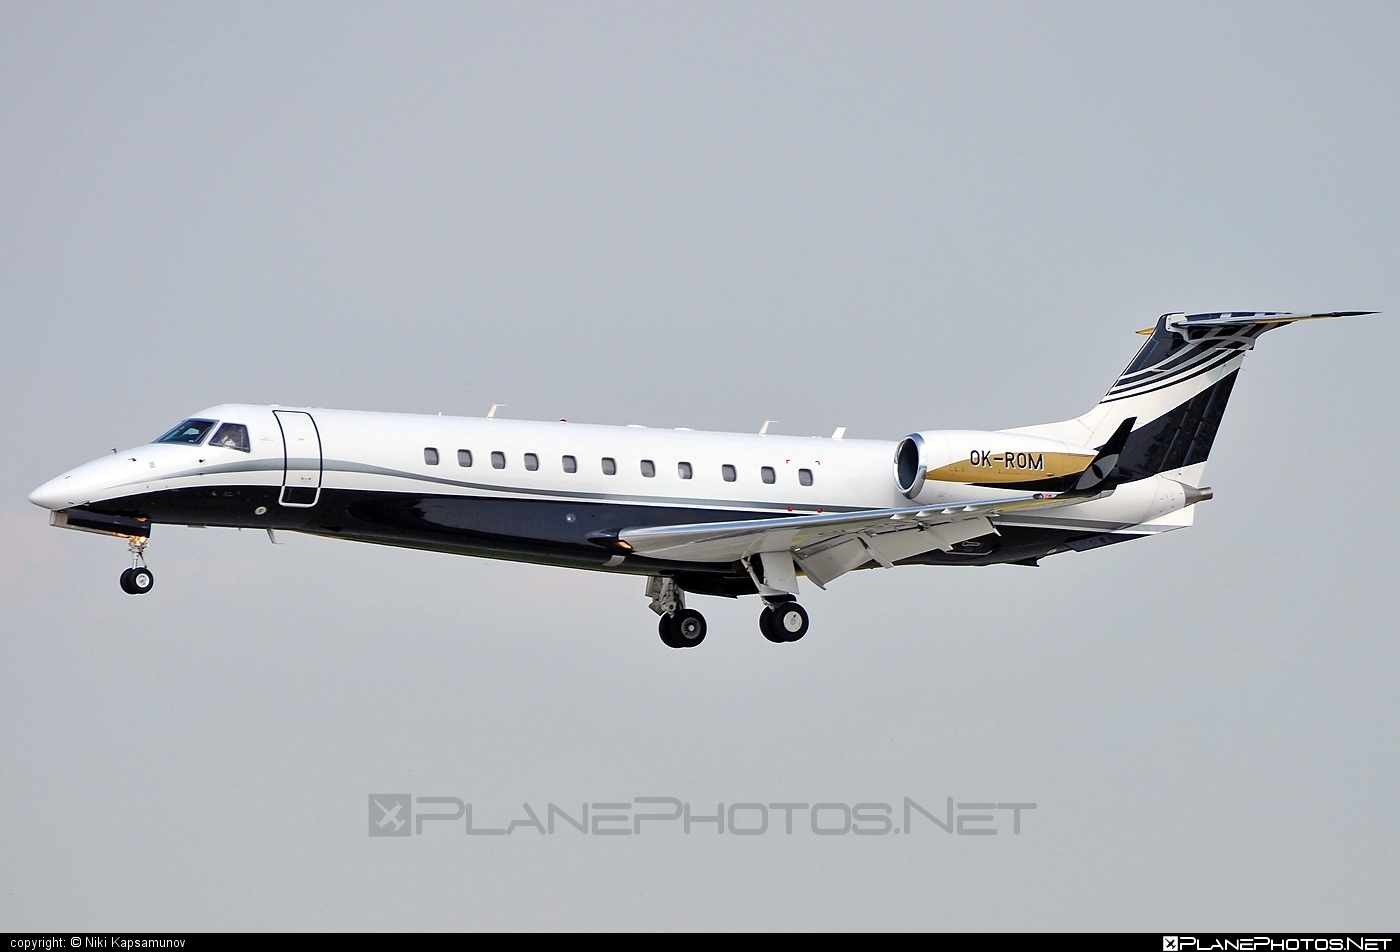 Embraer ERJ-135BJ Legacy - OK-ROM operated by ABS Jets #embraer #embraer135 #embraerlegacy #erj135 #erj135bj